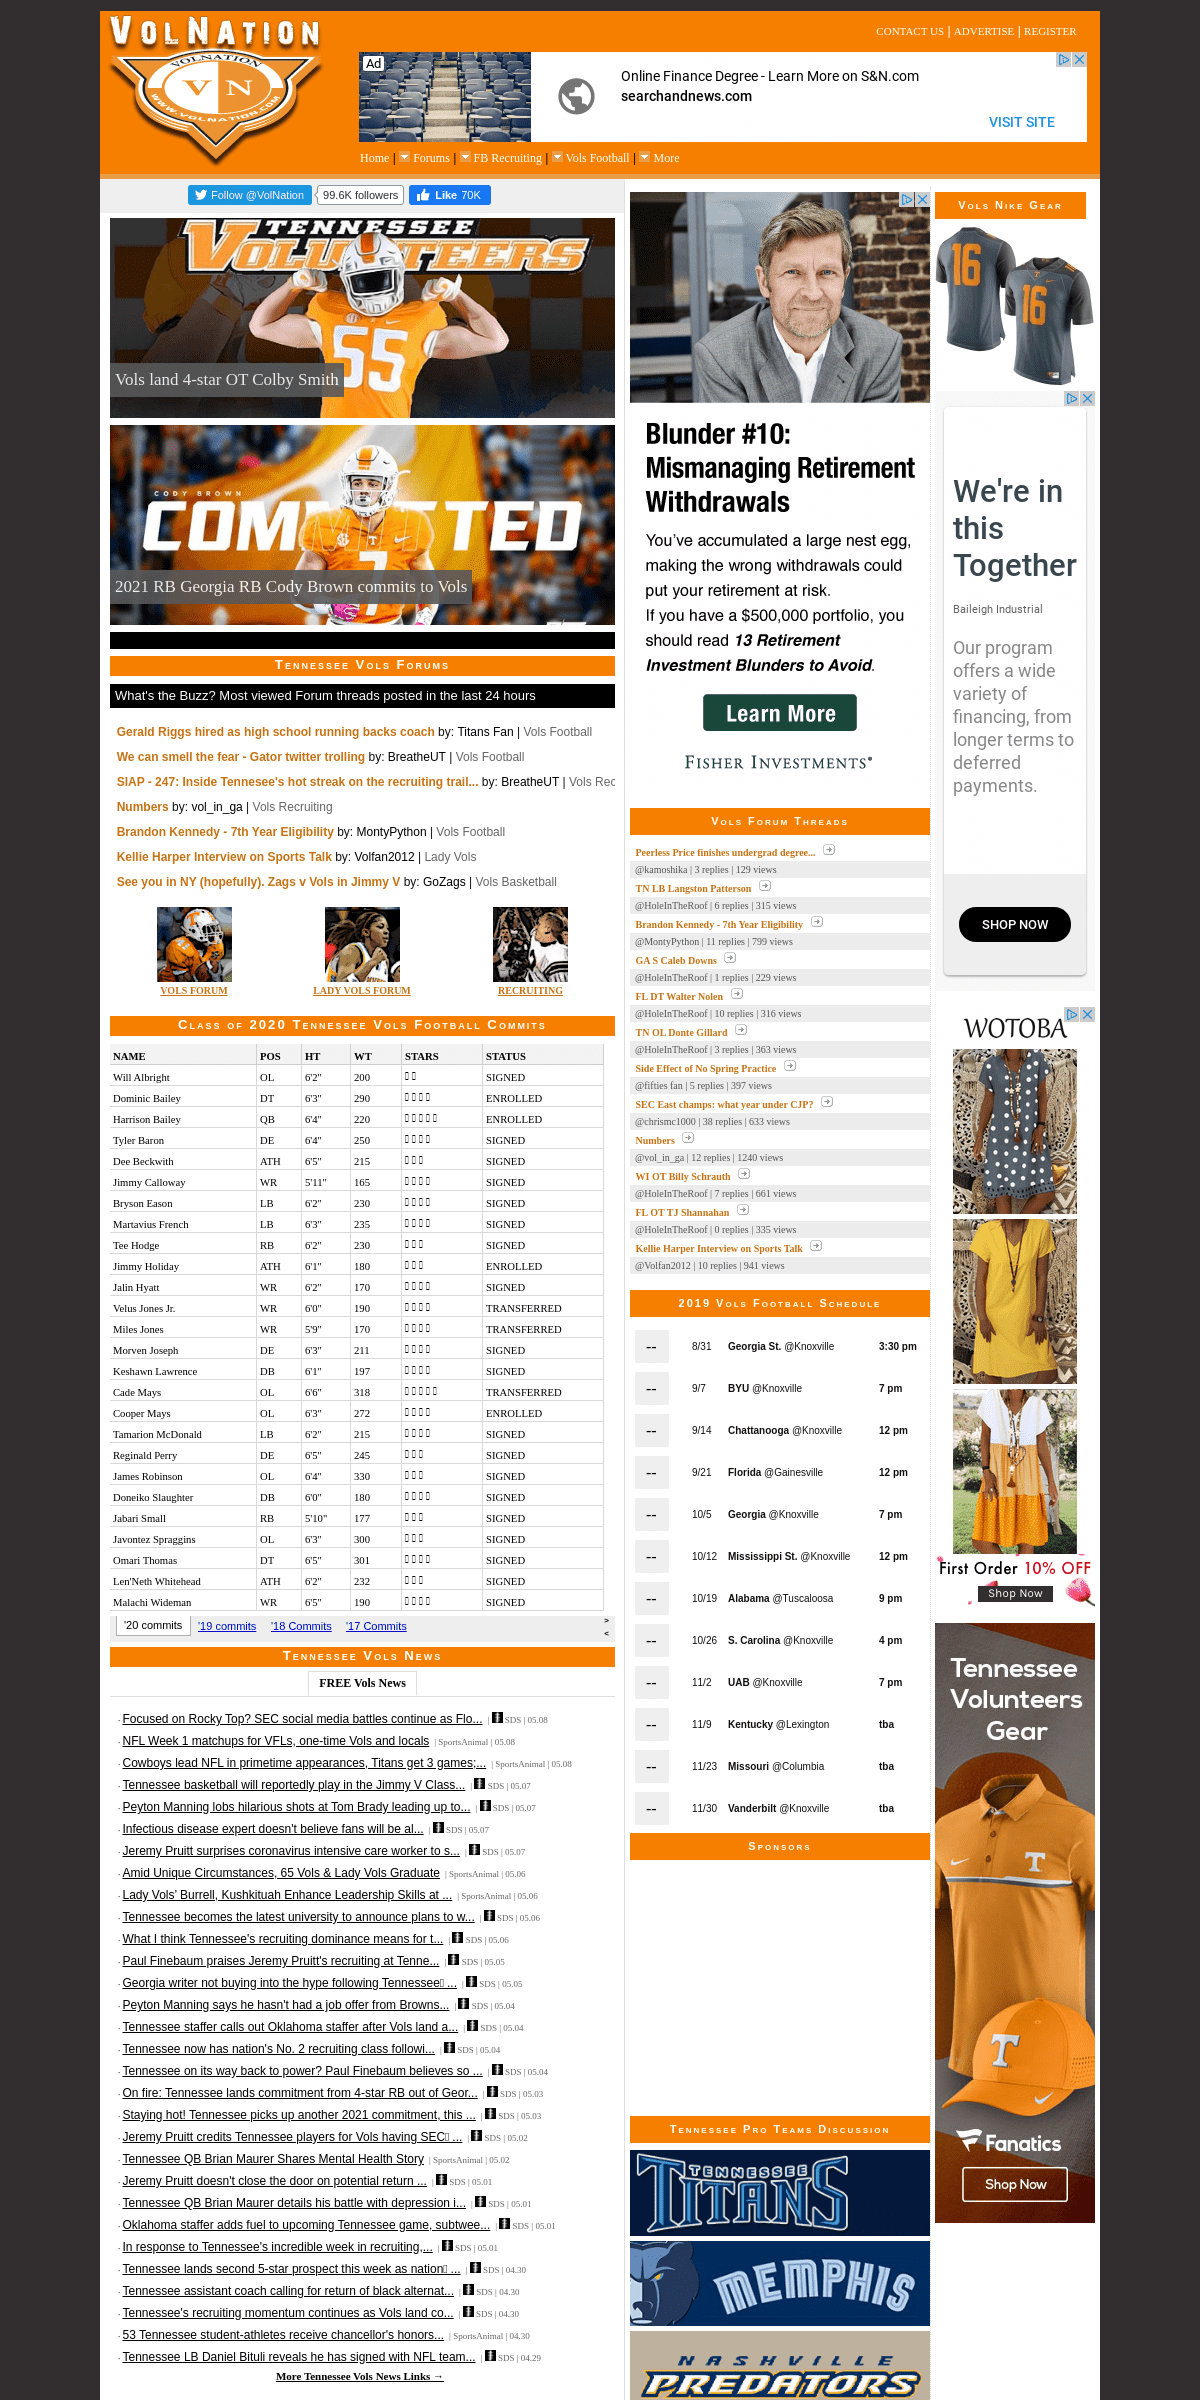 A complete backup of volnation.com